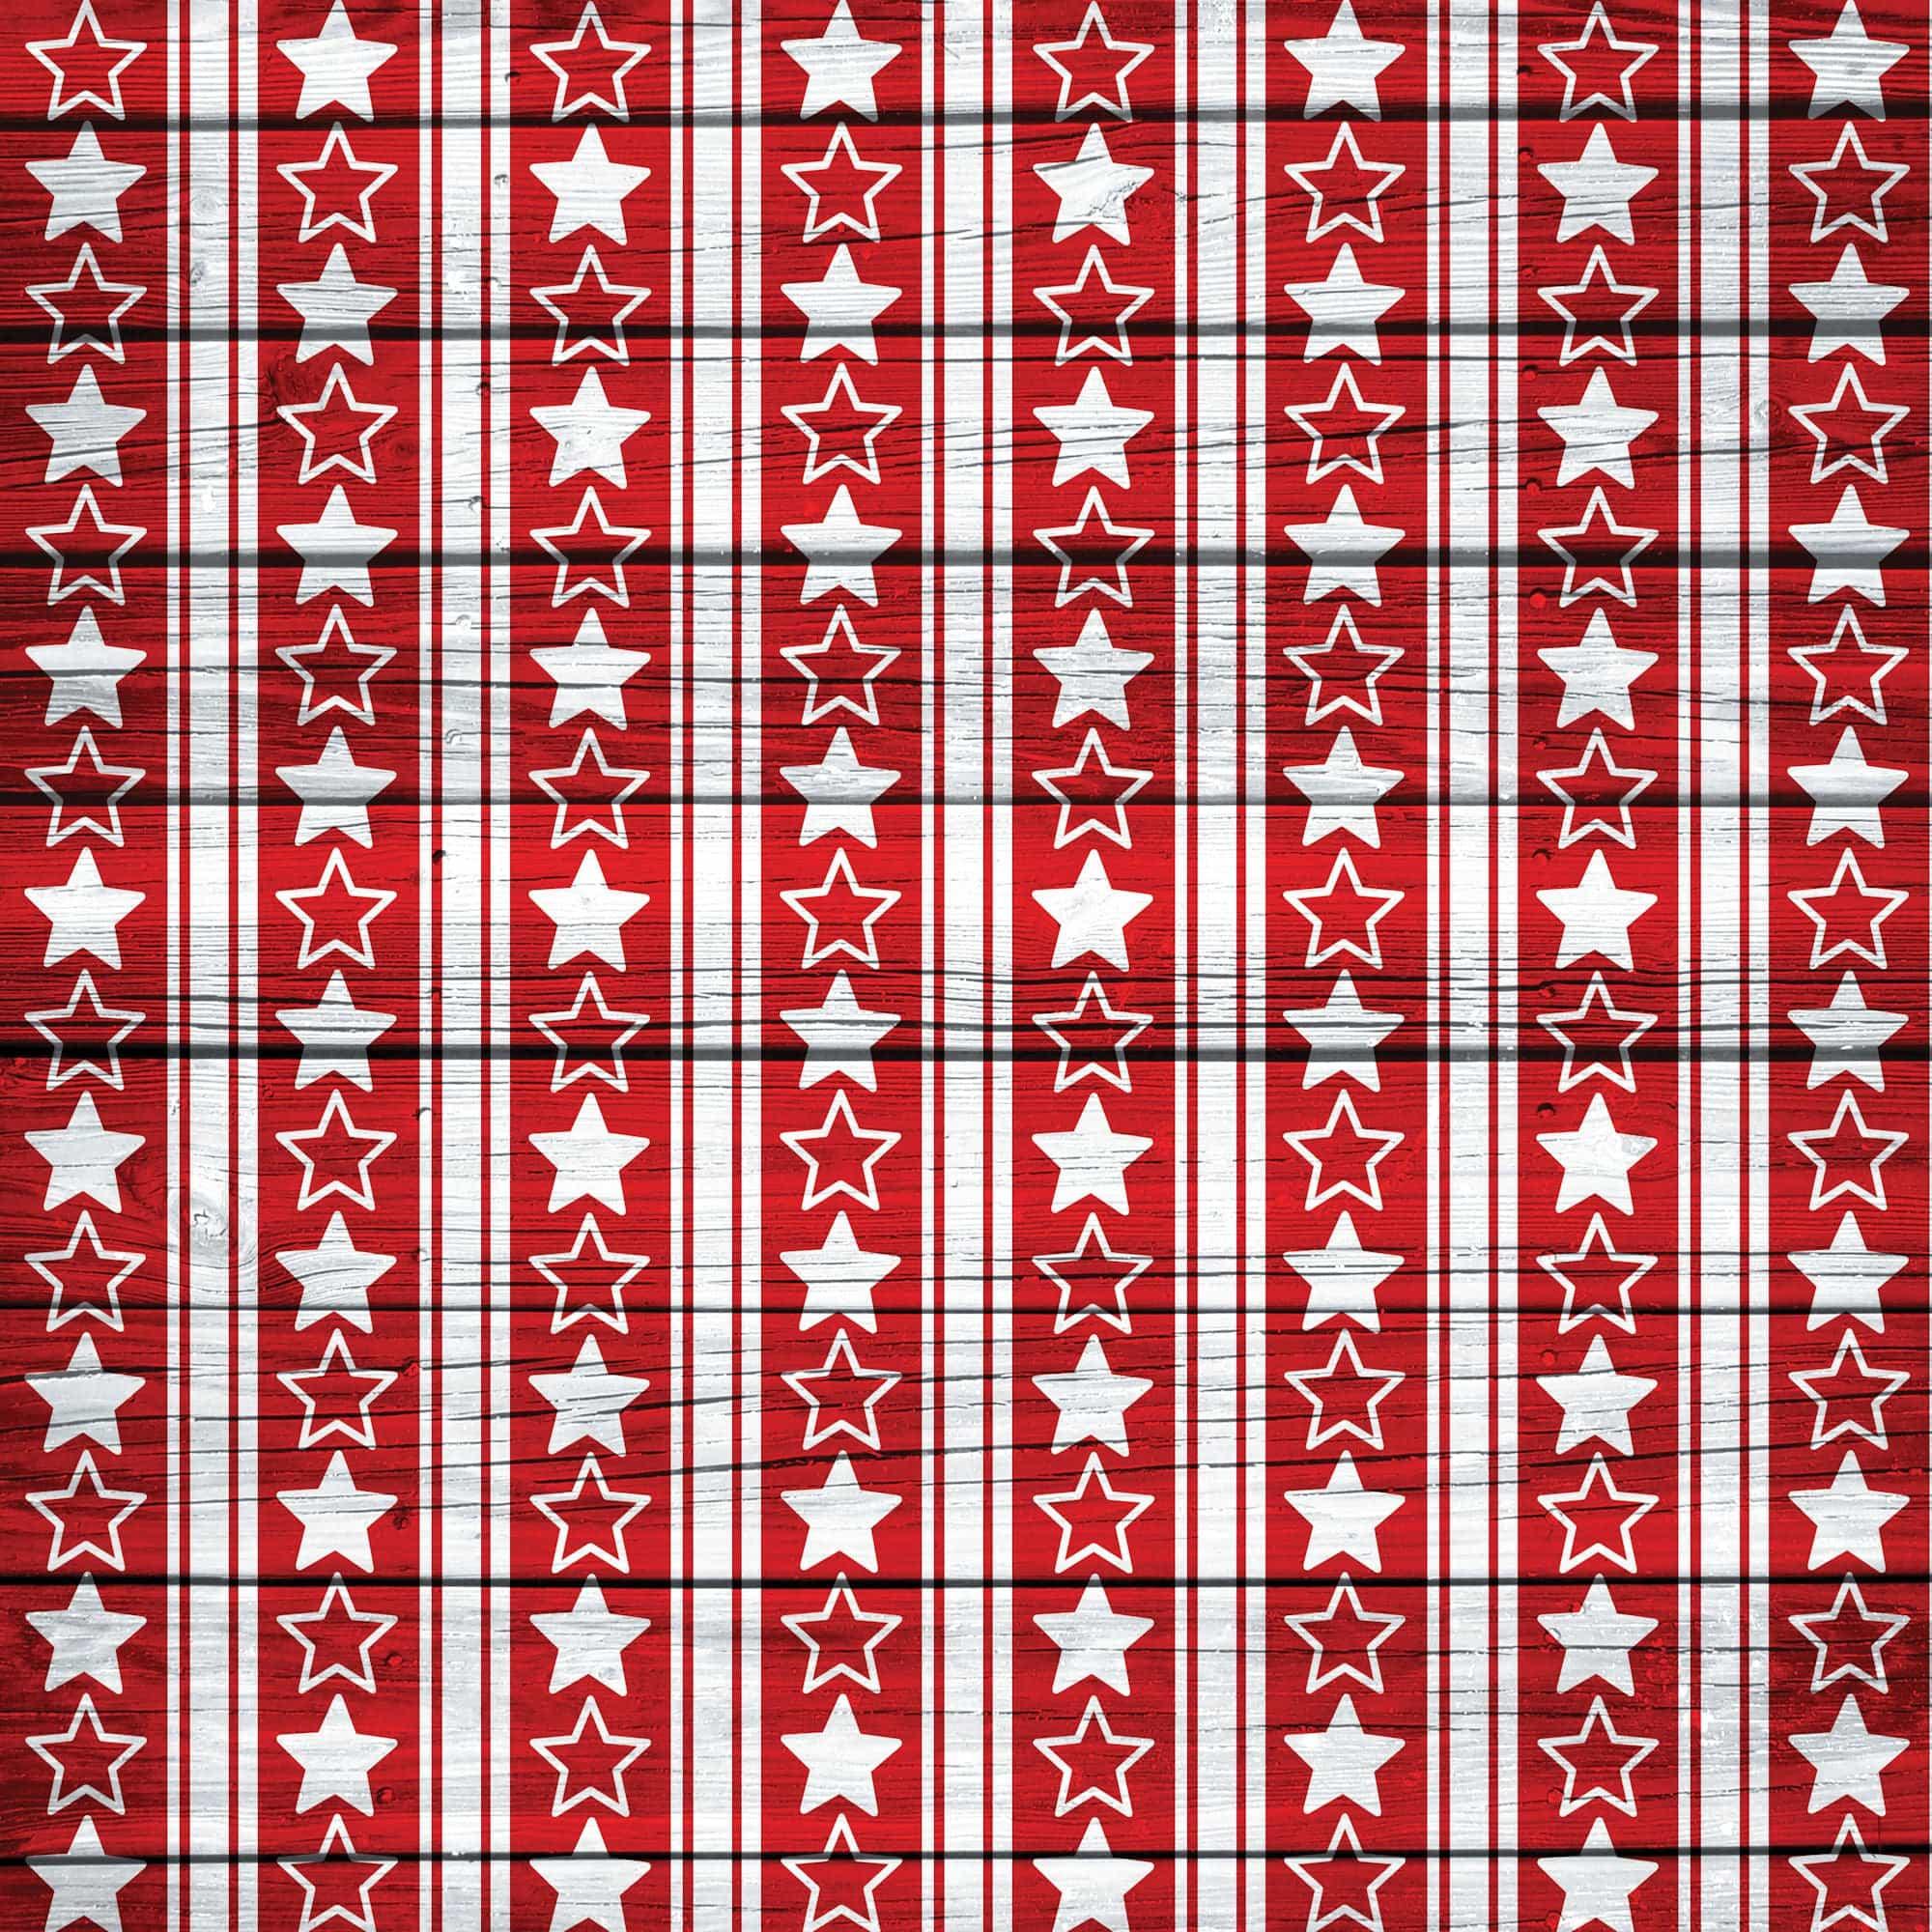 Patriotic Pups Collection King Cavalier 12 x 12 Double-Sided Scrapbook Paper by SSC Designs - Scrapbook Supply Companies